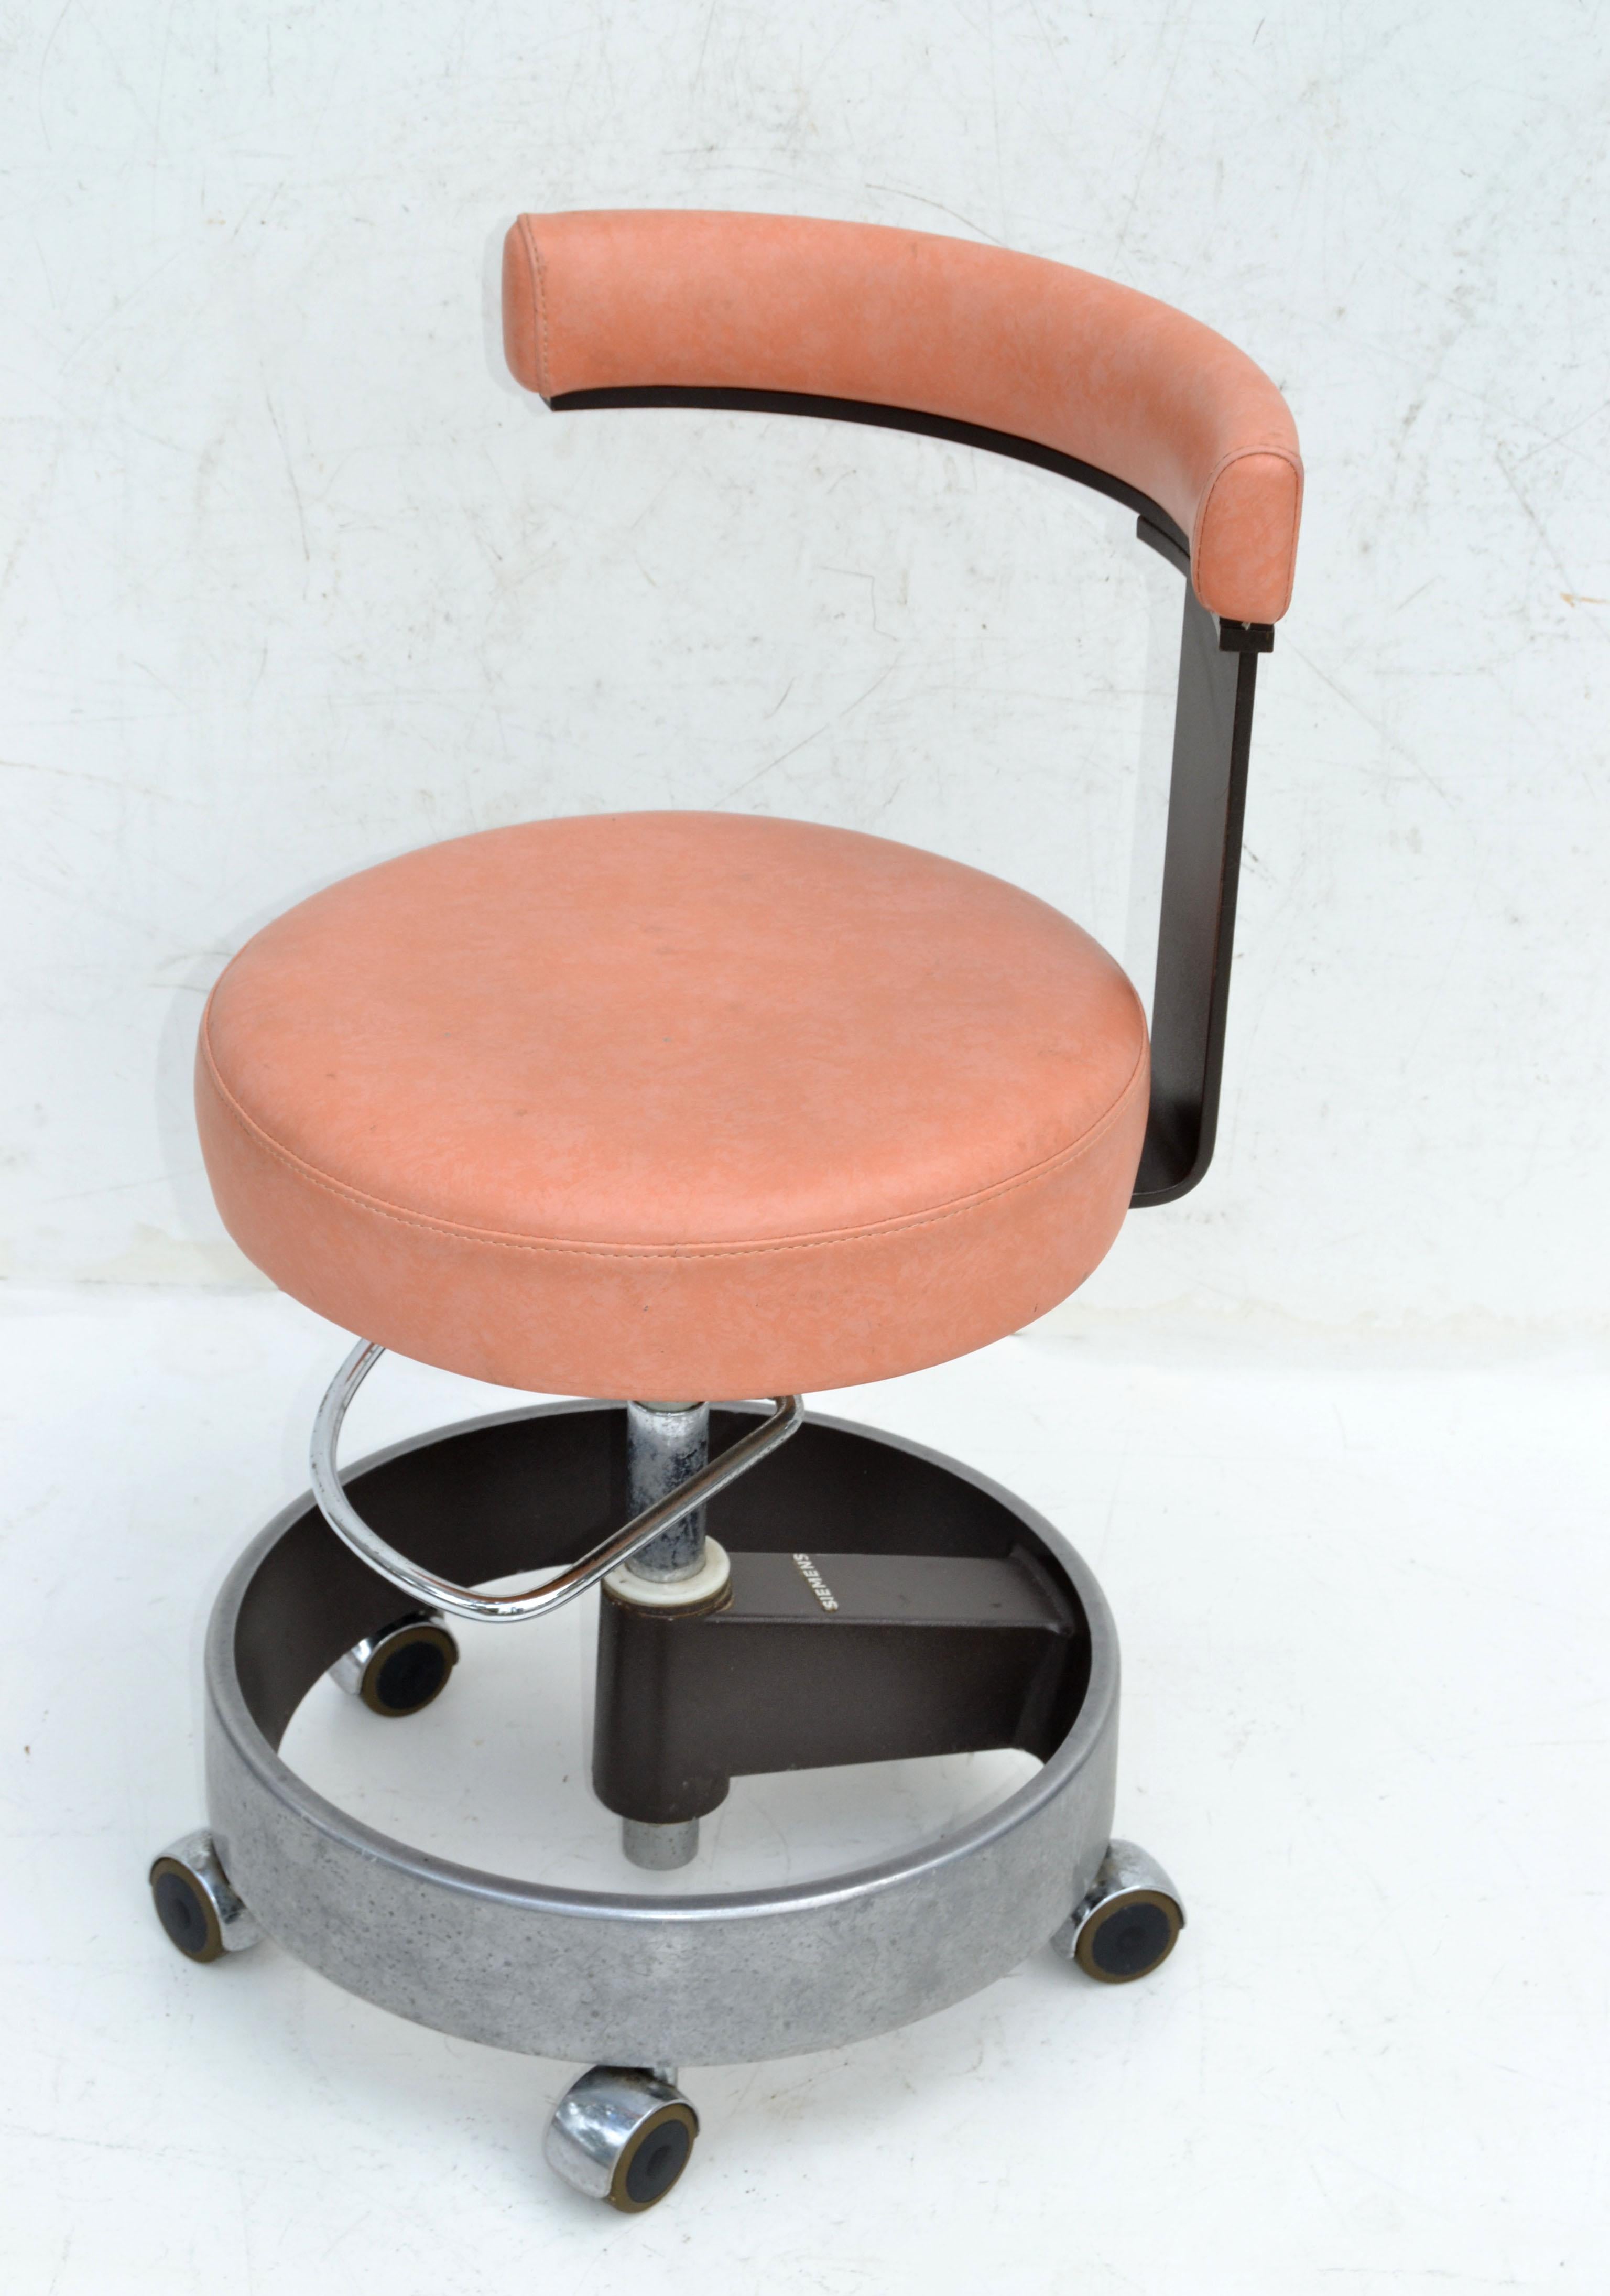 Siemens Vintage Industrial German Office, Dental, Medical Stool Peach Leather  In Fair Condition For Sale In Miami, FL